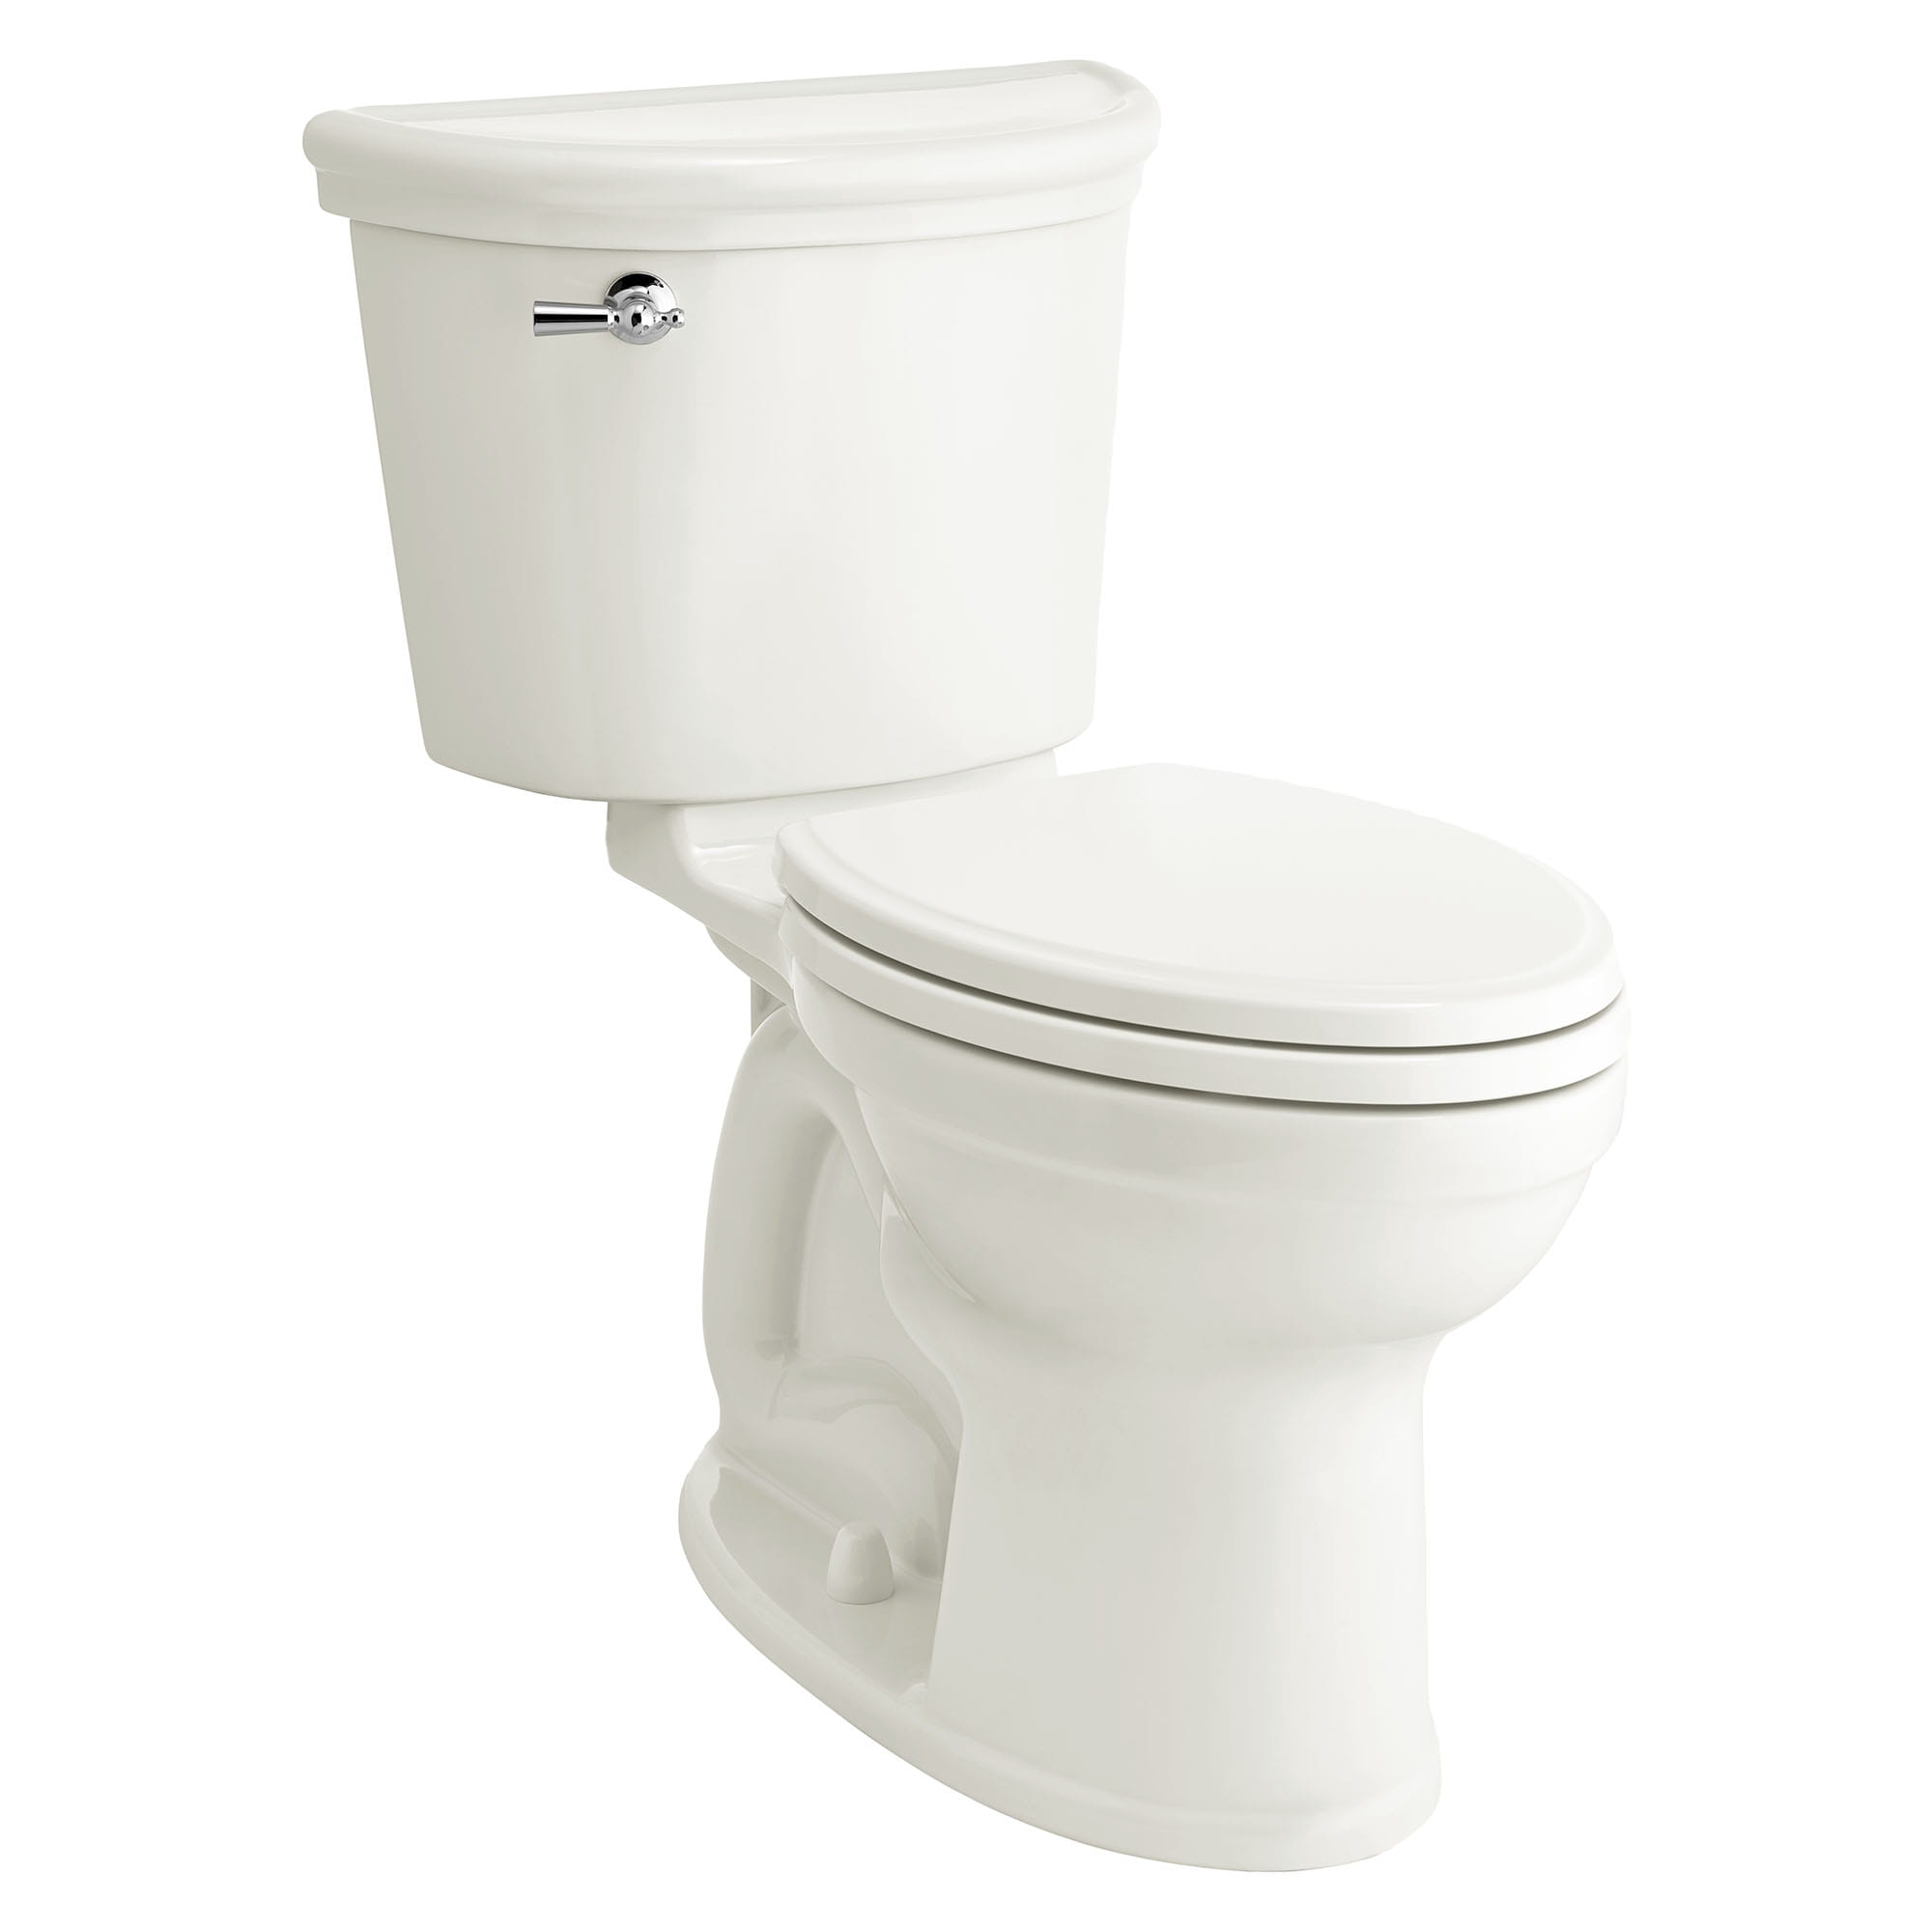 Retrospect Champion PRO Two-Piece 1.28 gpf/4.8 Lpf Chair Height Elongated Toilet less Seat